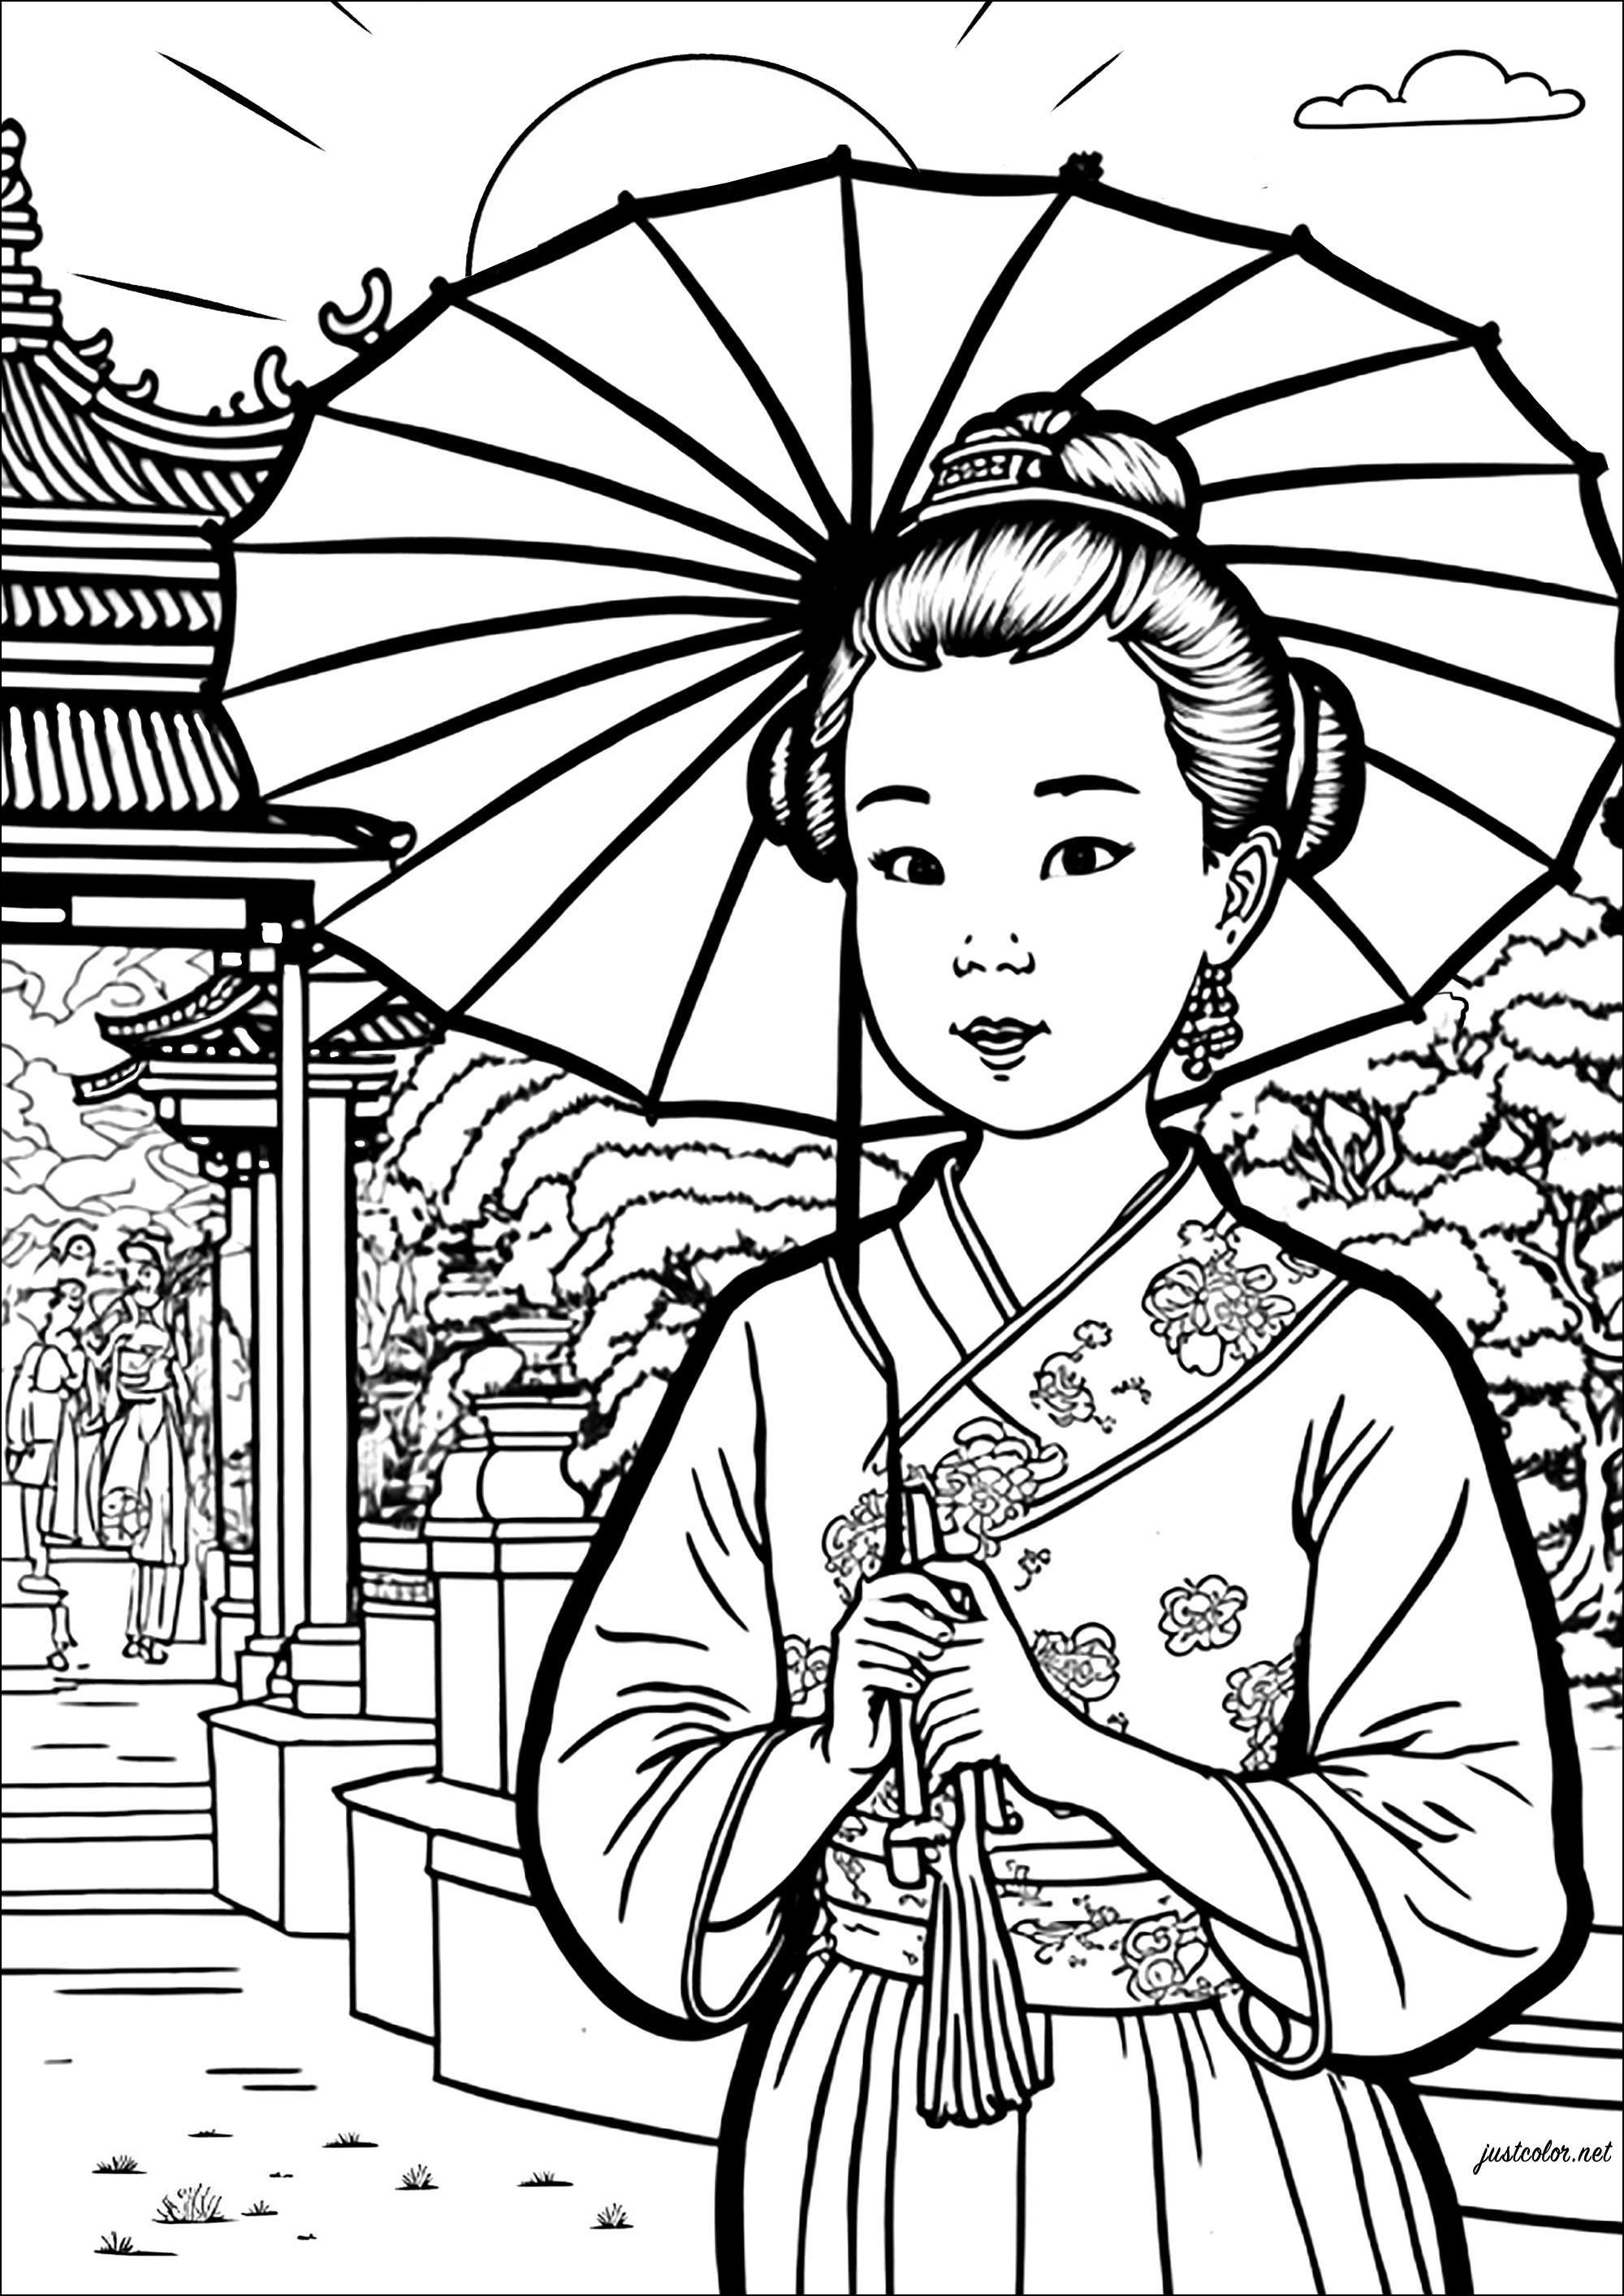 Coloring page of a young Chinese woman with an umbrella. Also color the pretty temple and the garden in the background of this beautiful drawing.